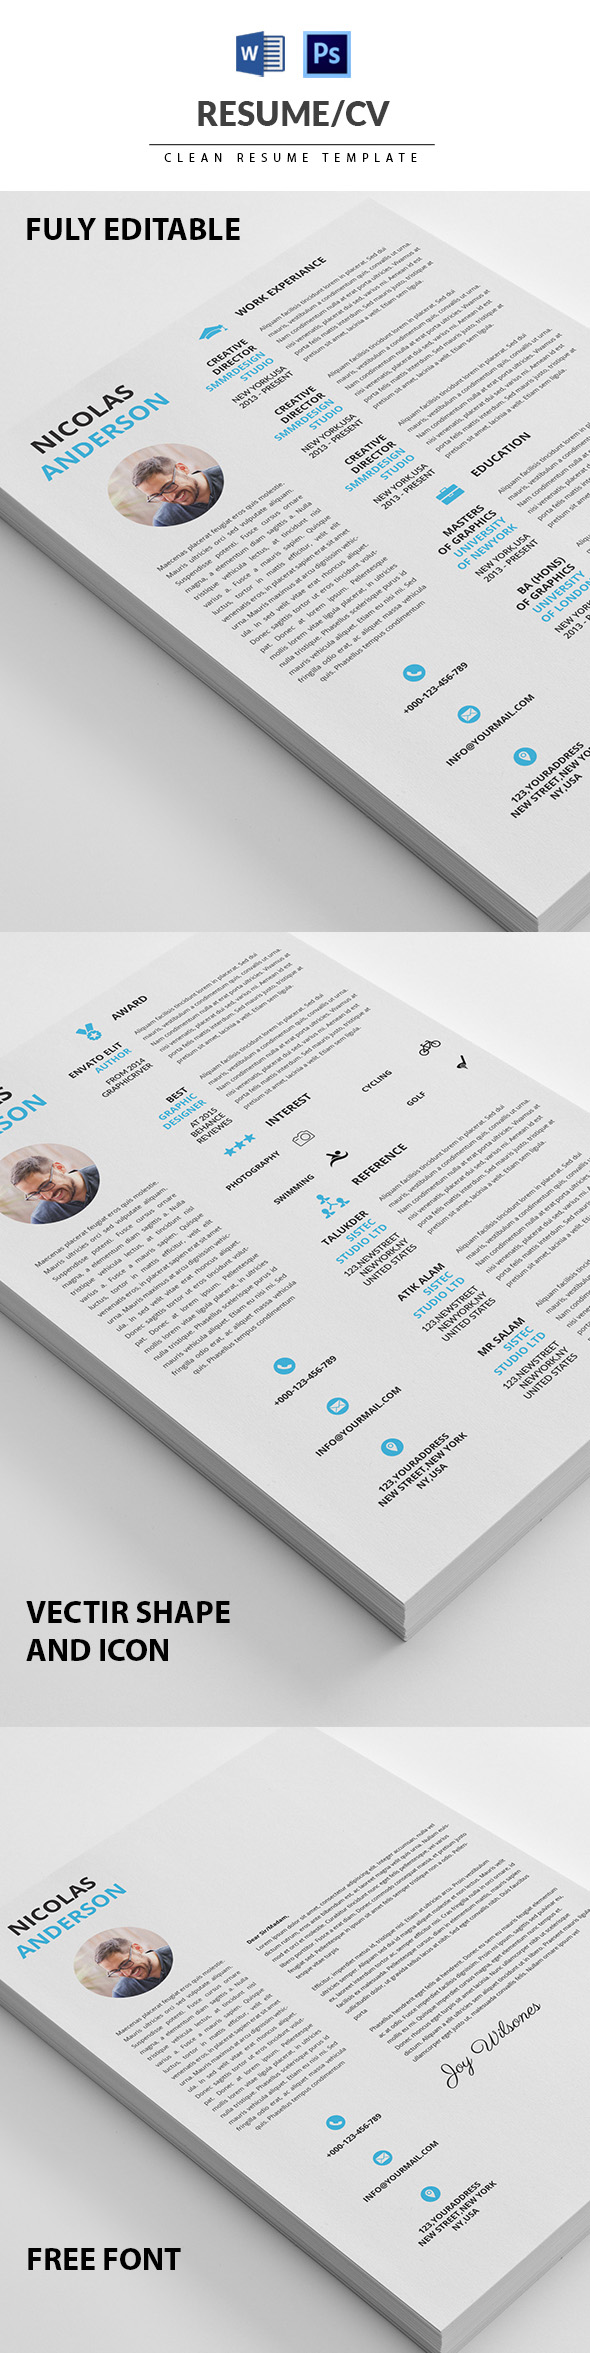 50 Best Resume Templates For 2018 - 44